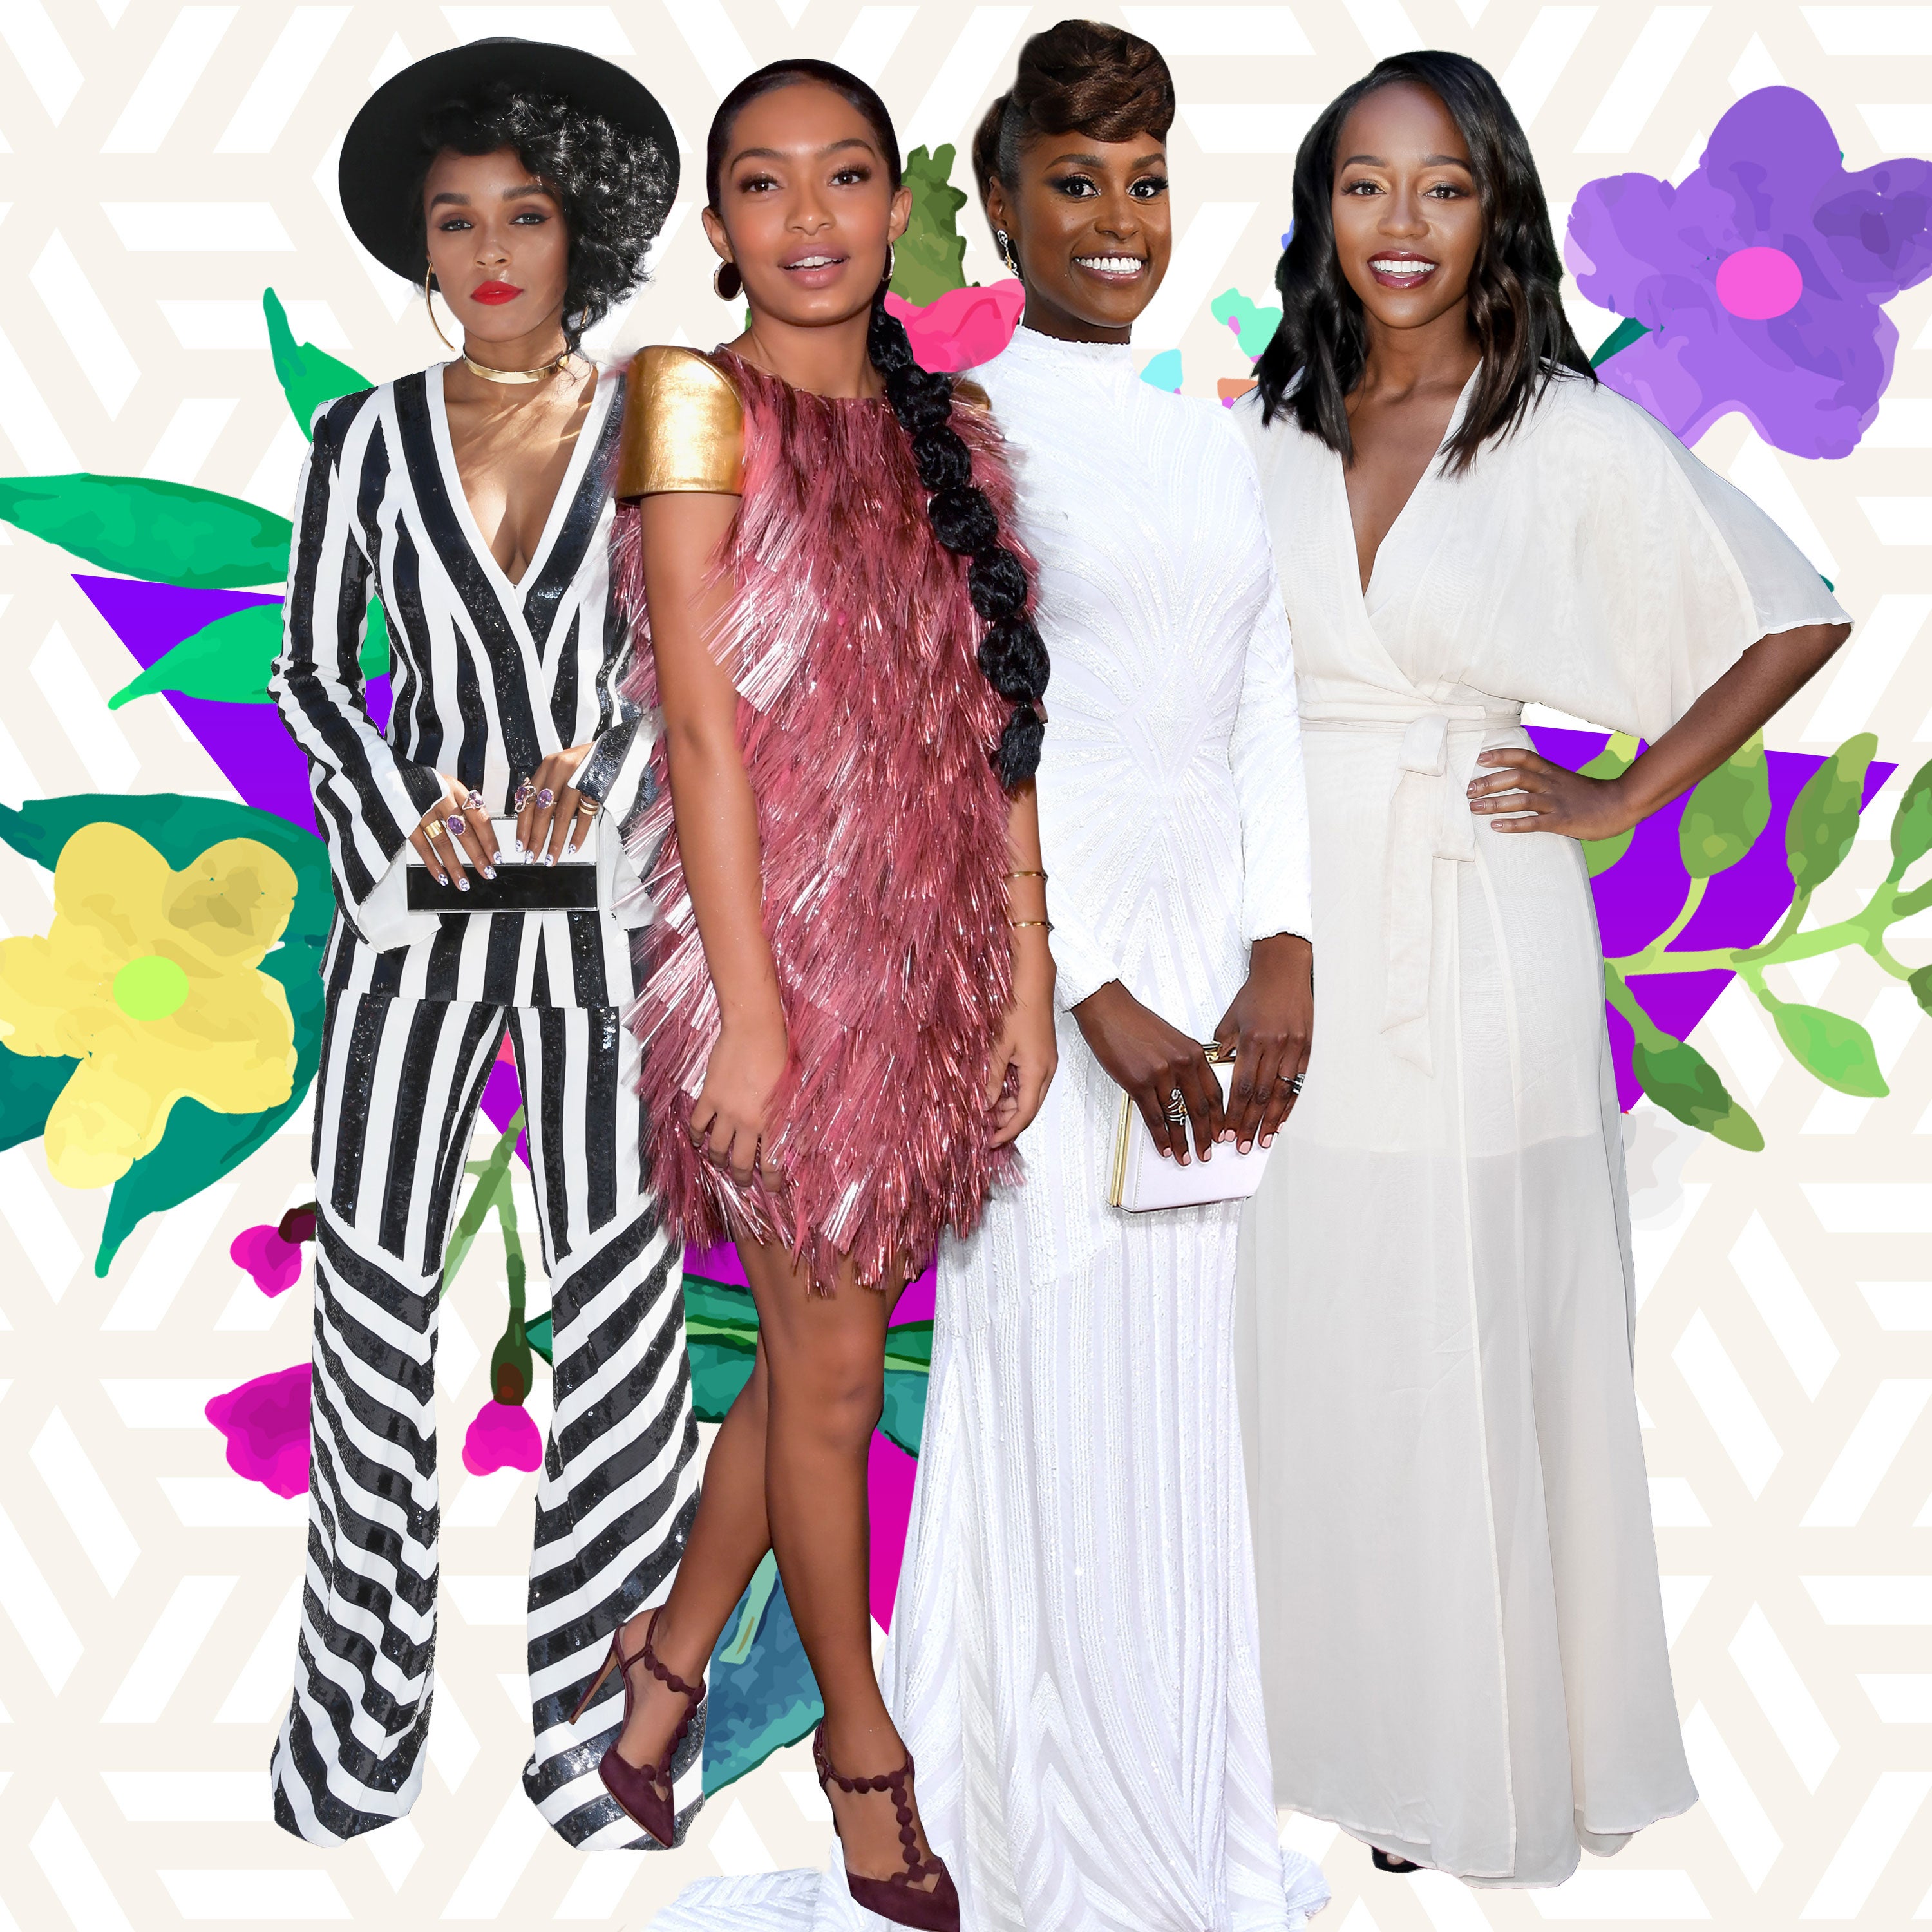 Issa, Janelle, Aja and Yara To Be Honored At ESSENCE's Black Women In Hollywood Event
